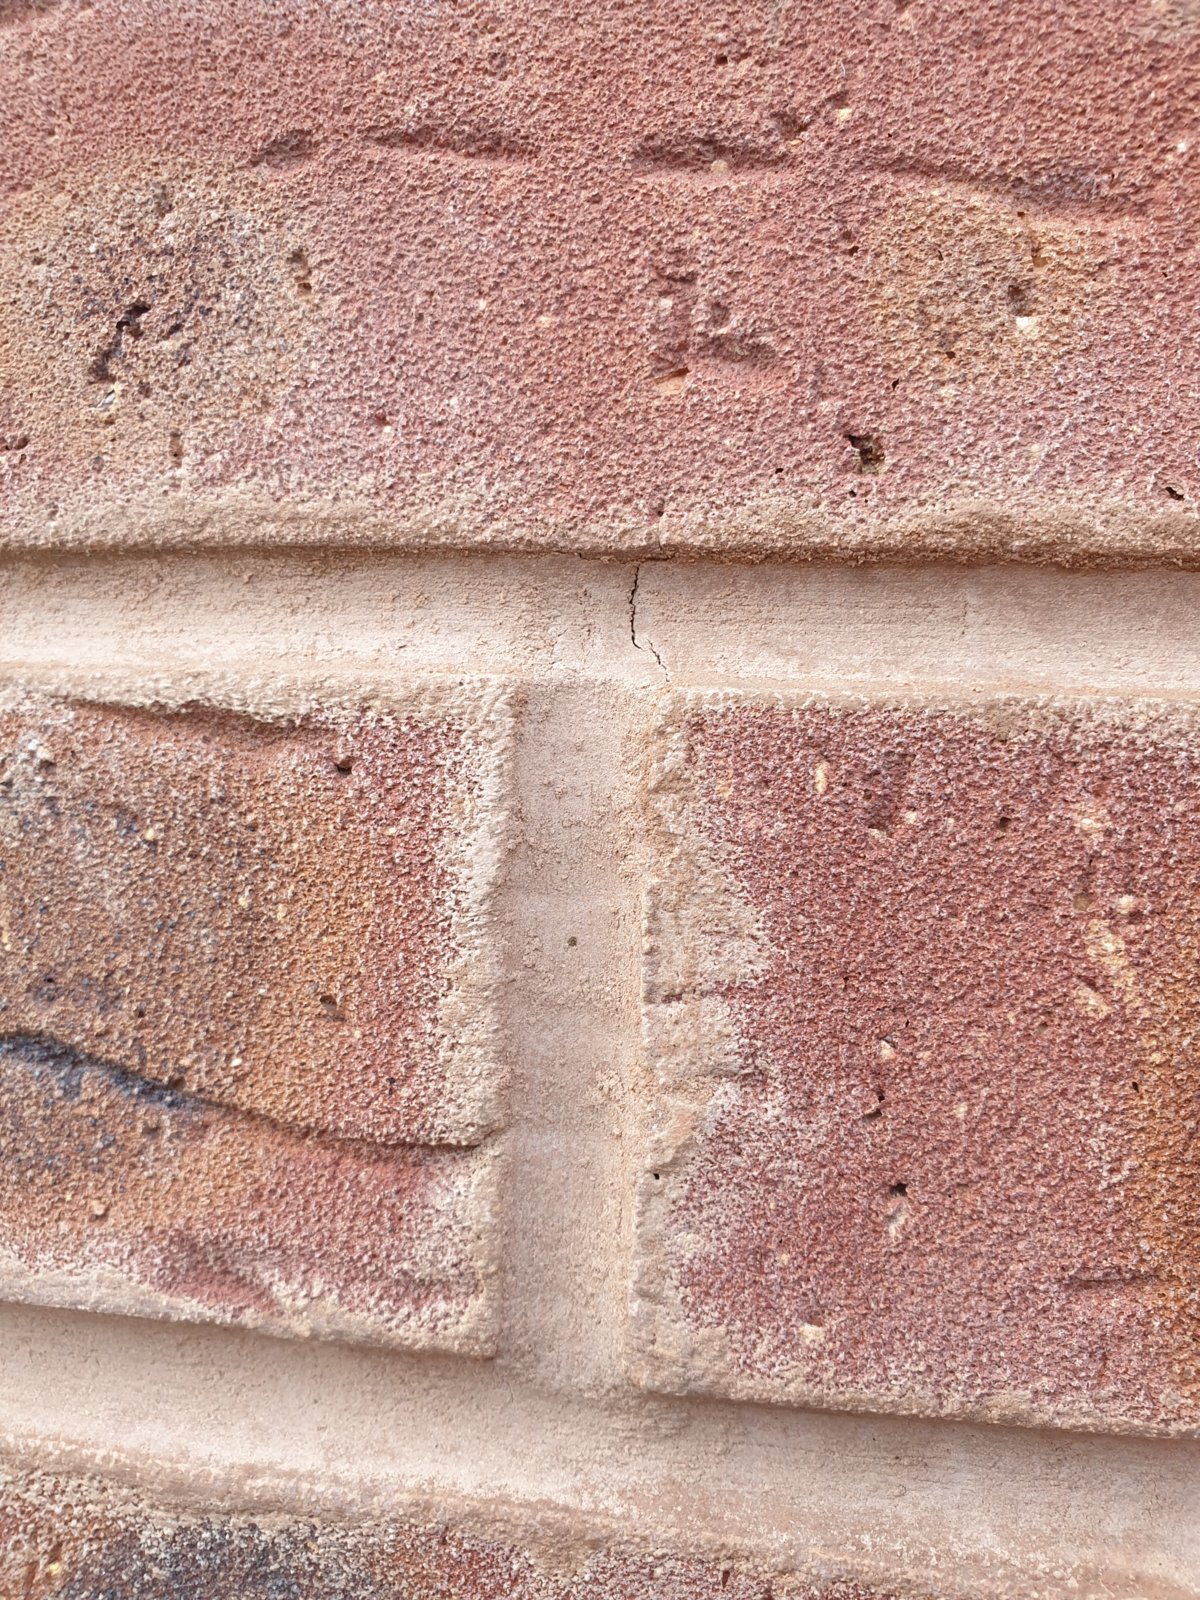 Hairline cracks following repointing | DIYnot Forums